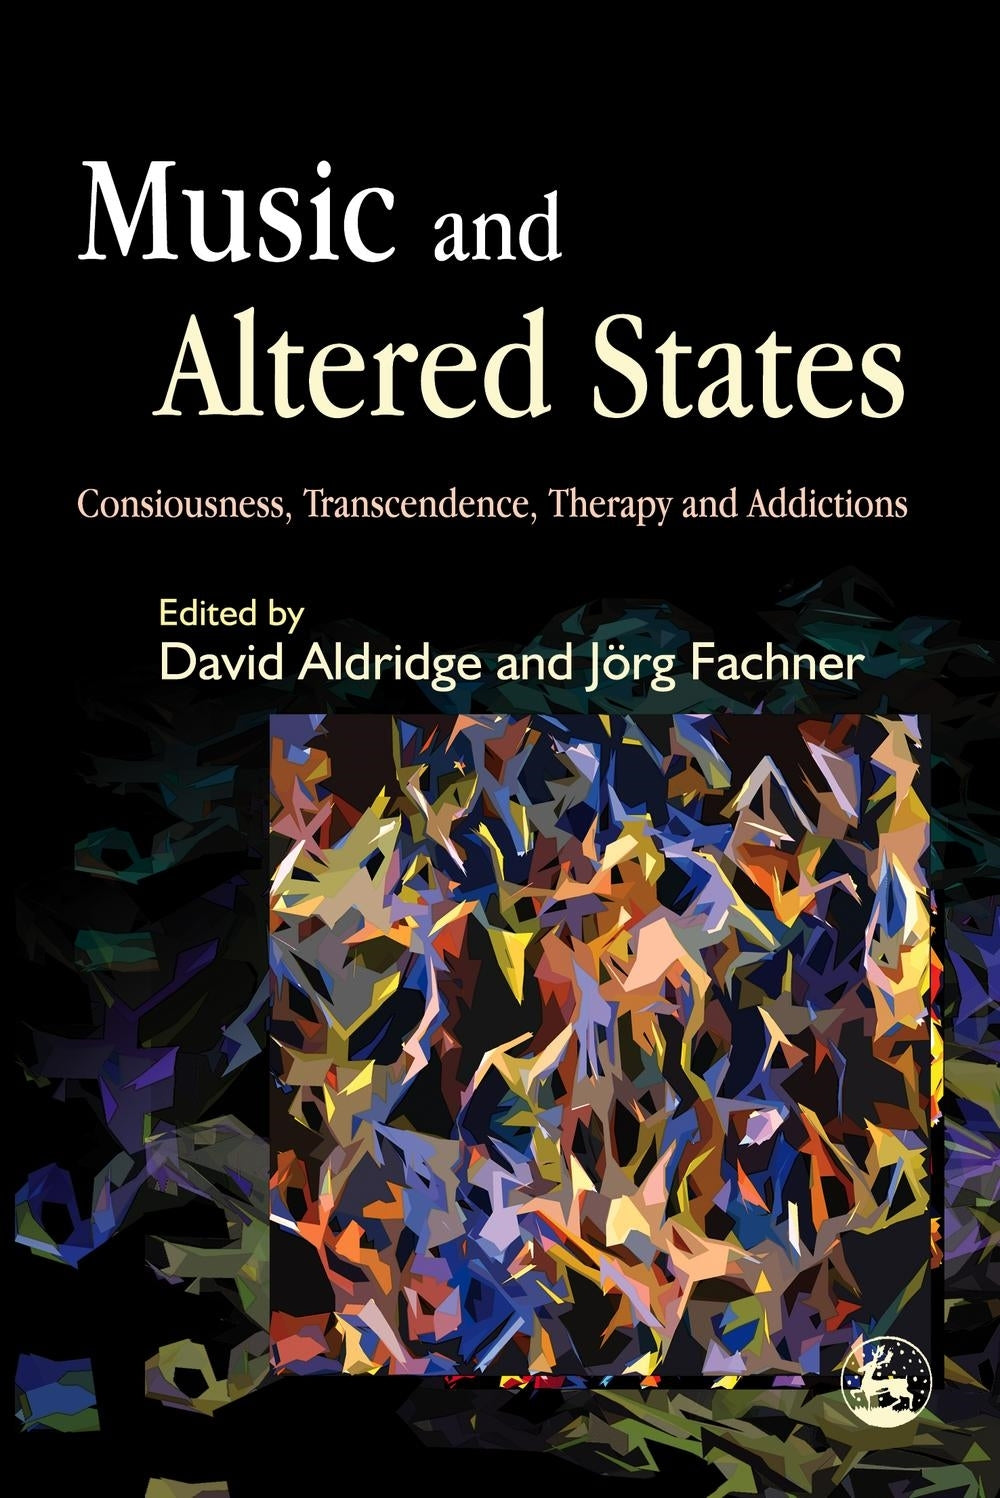 Music and Altered States by David Aldridge, Joerg Fachner, No Author Listed